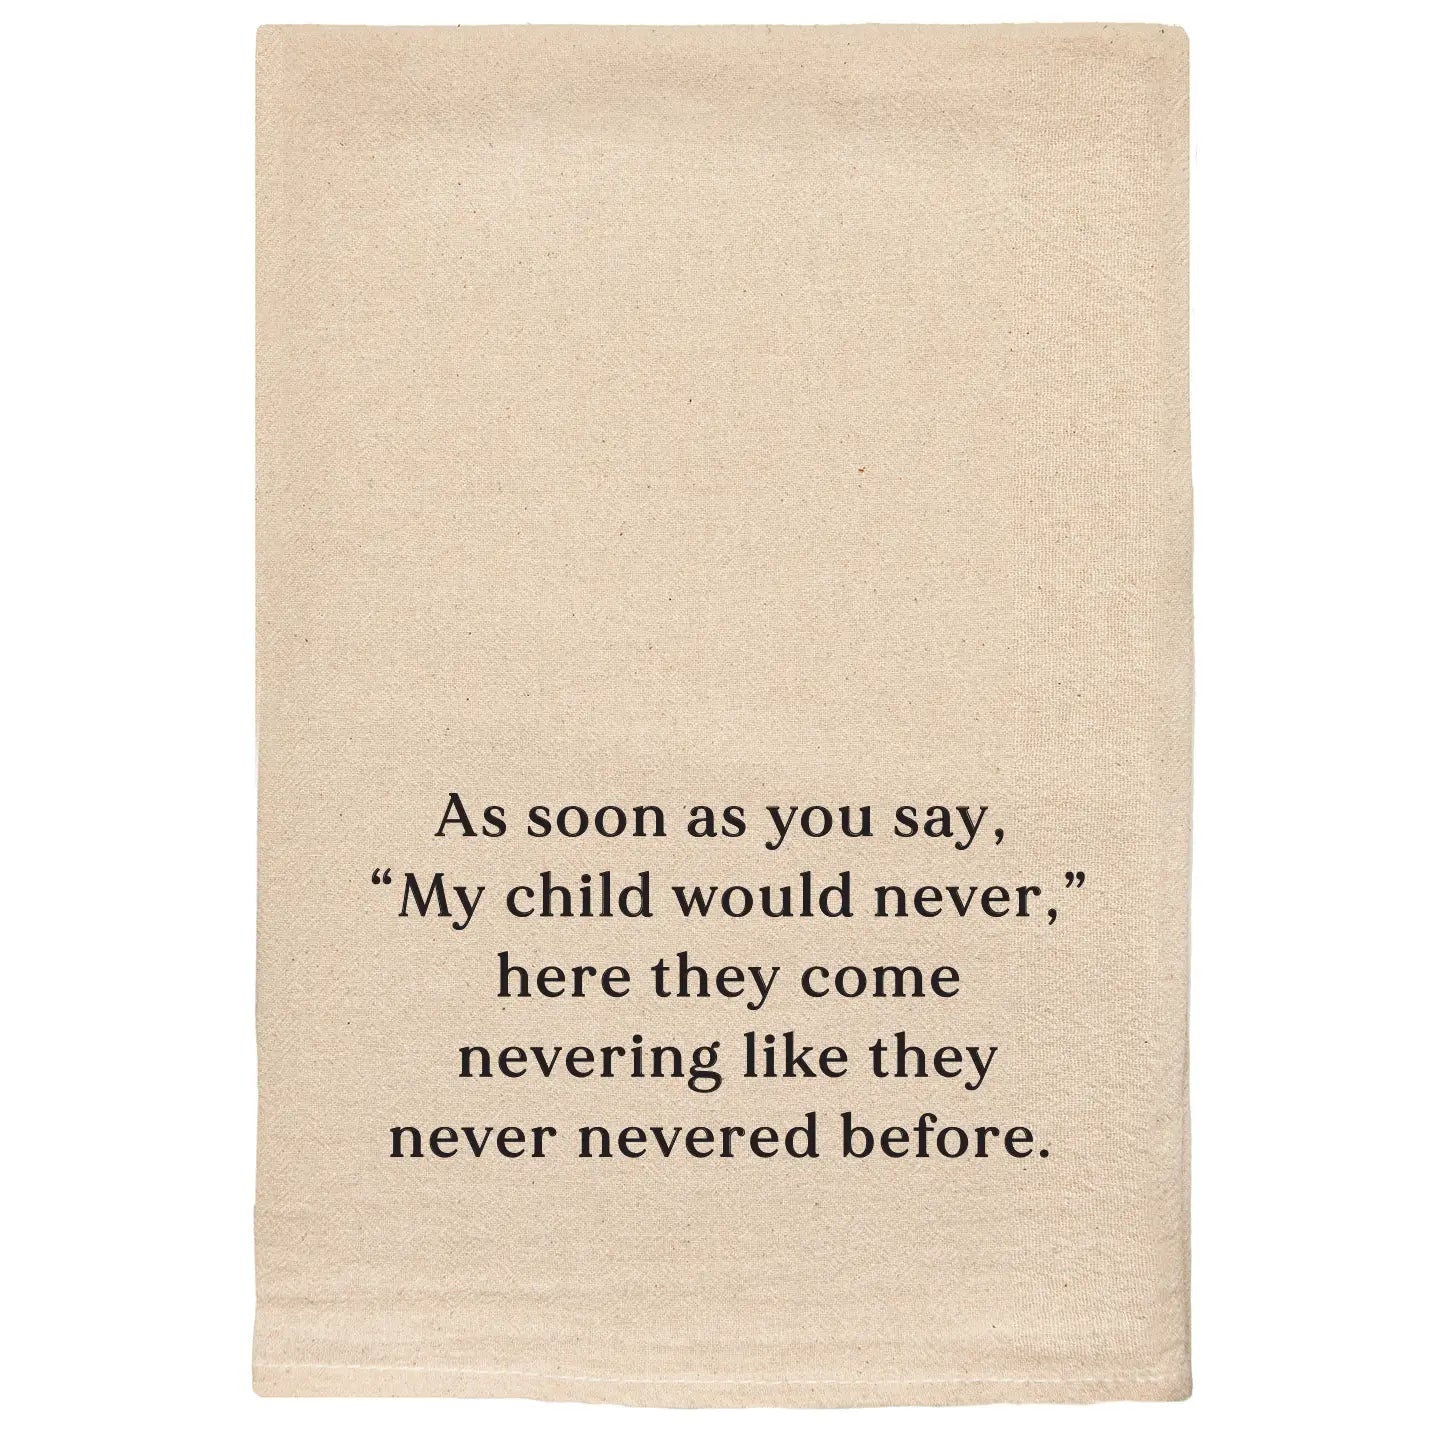 My Child Would Never Tea Towel